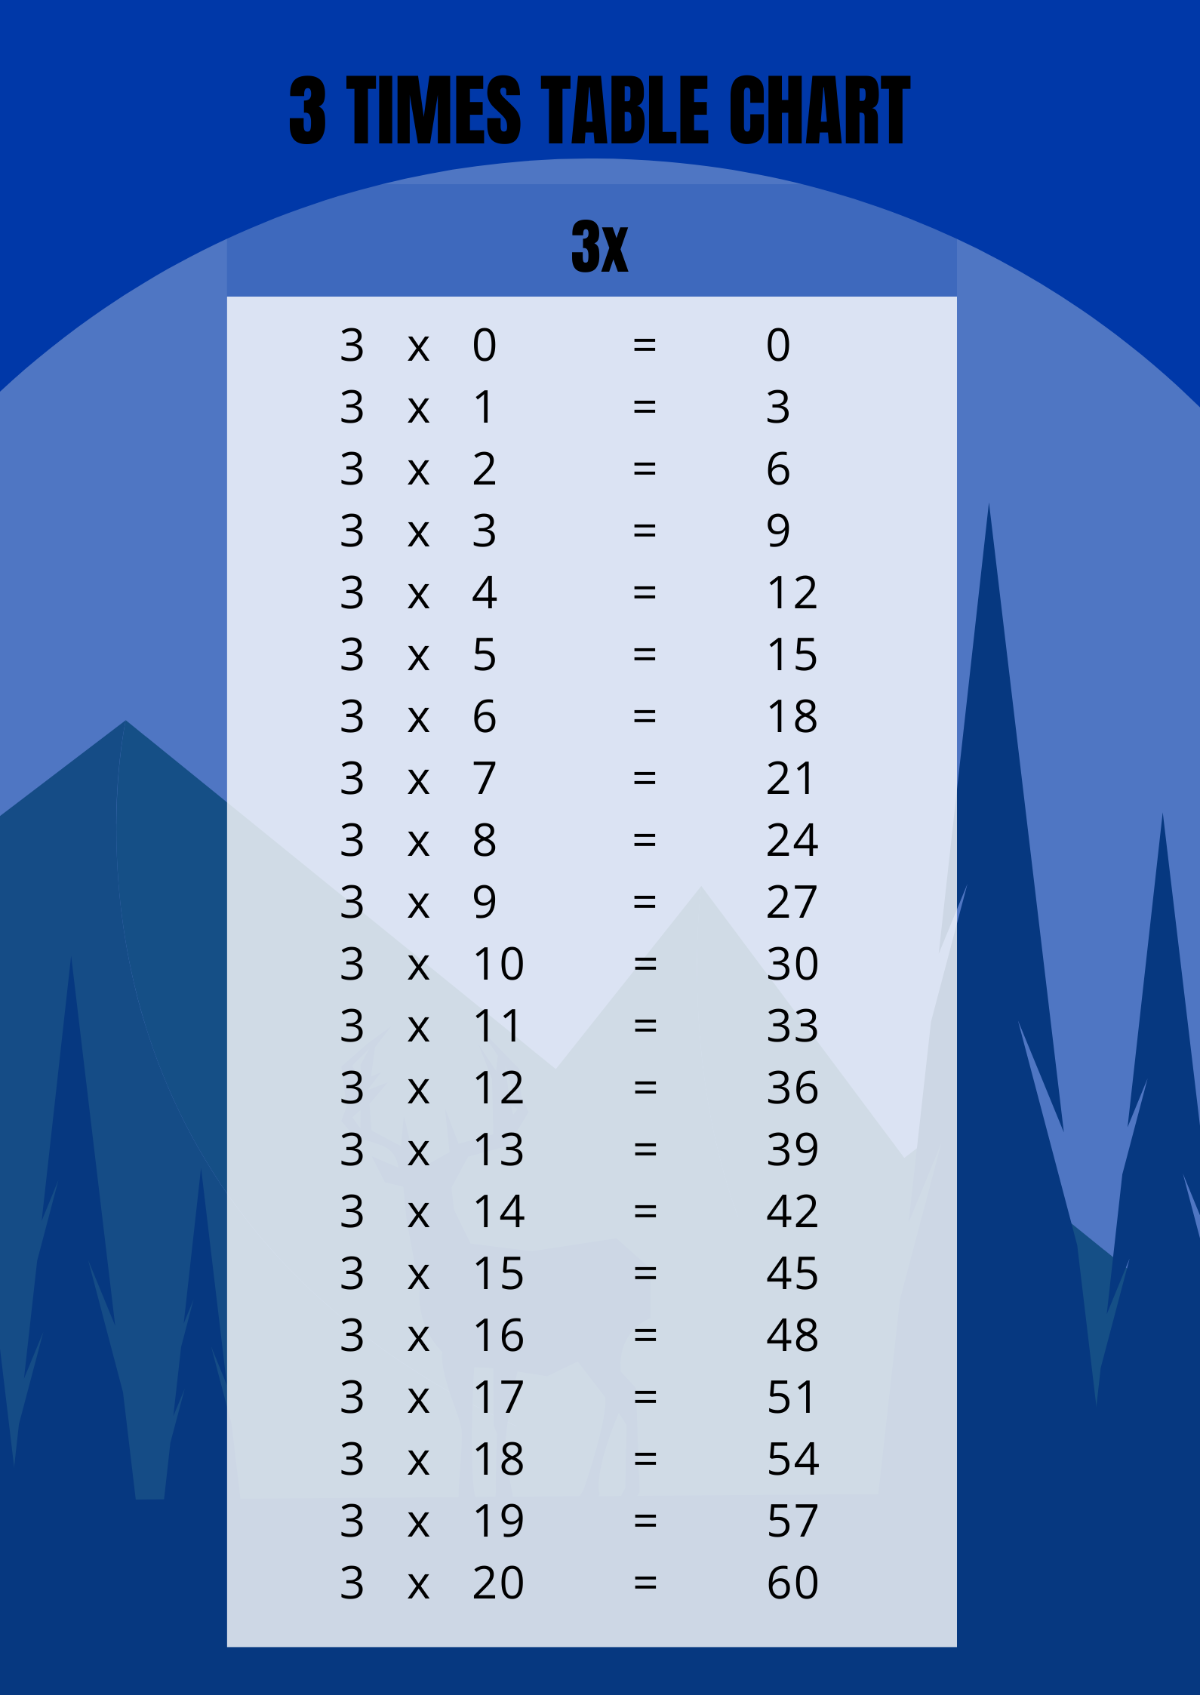 3 Times Table Chart Template